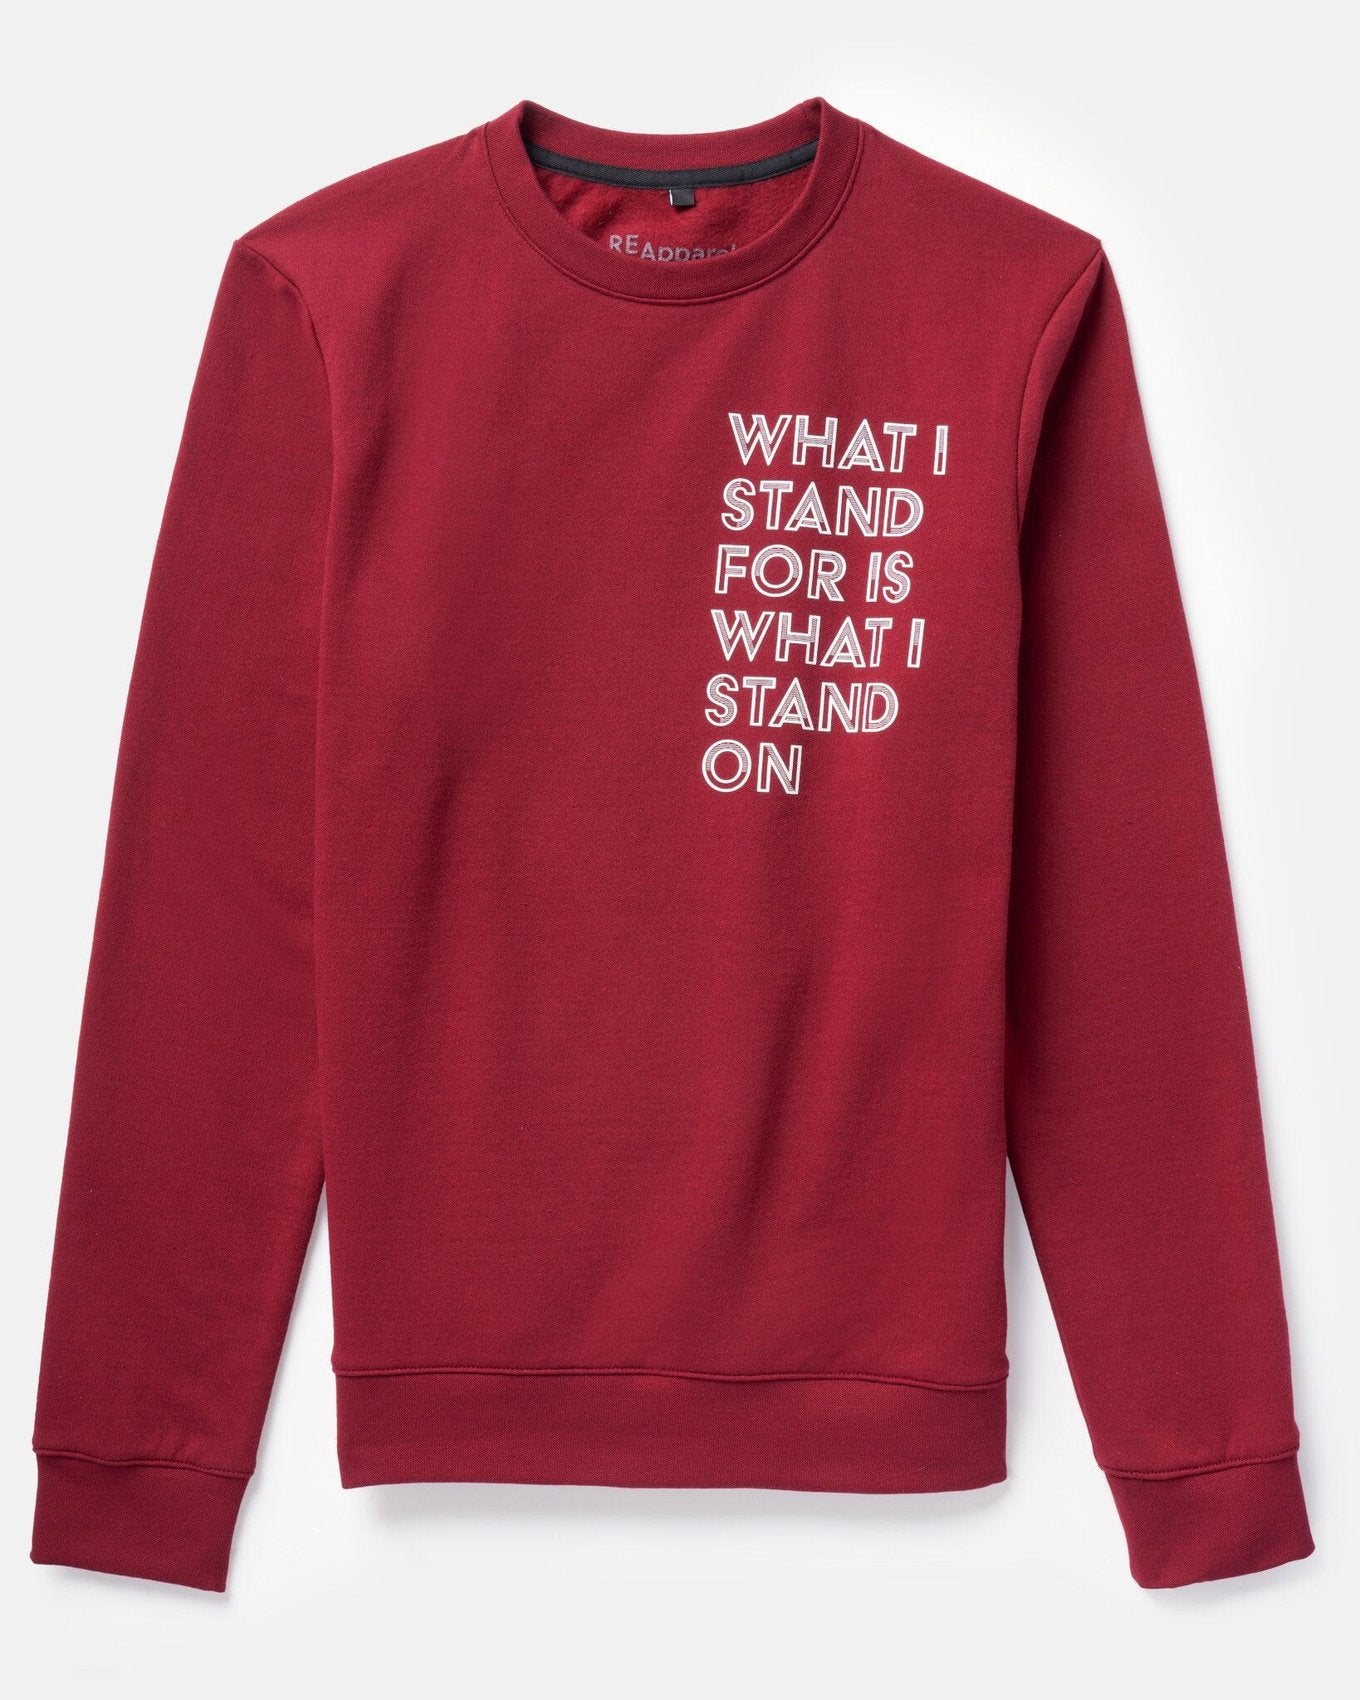 ReApparel Stand Crew Neck . in color Garnet and shape long sleeve